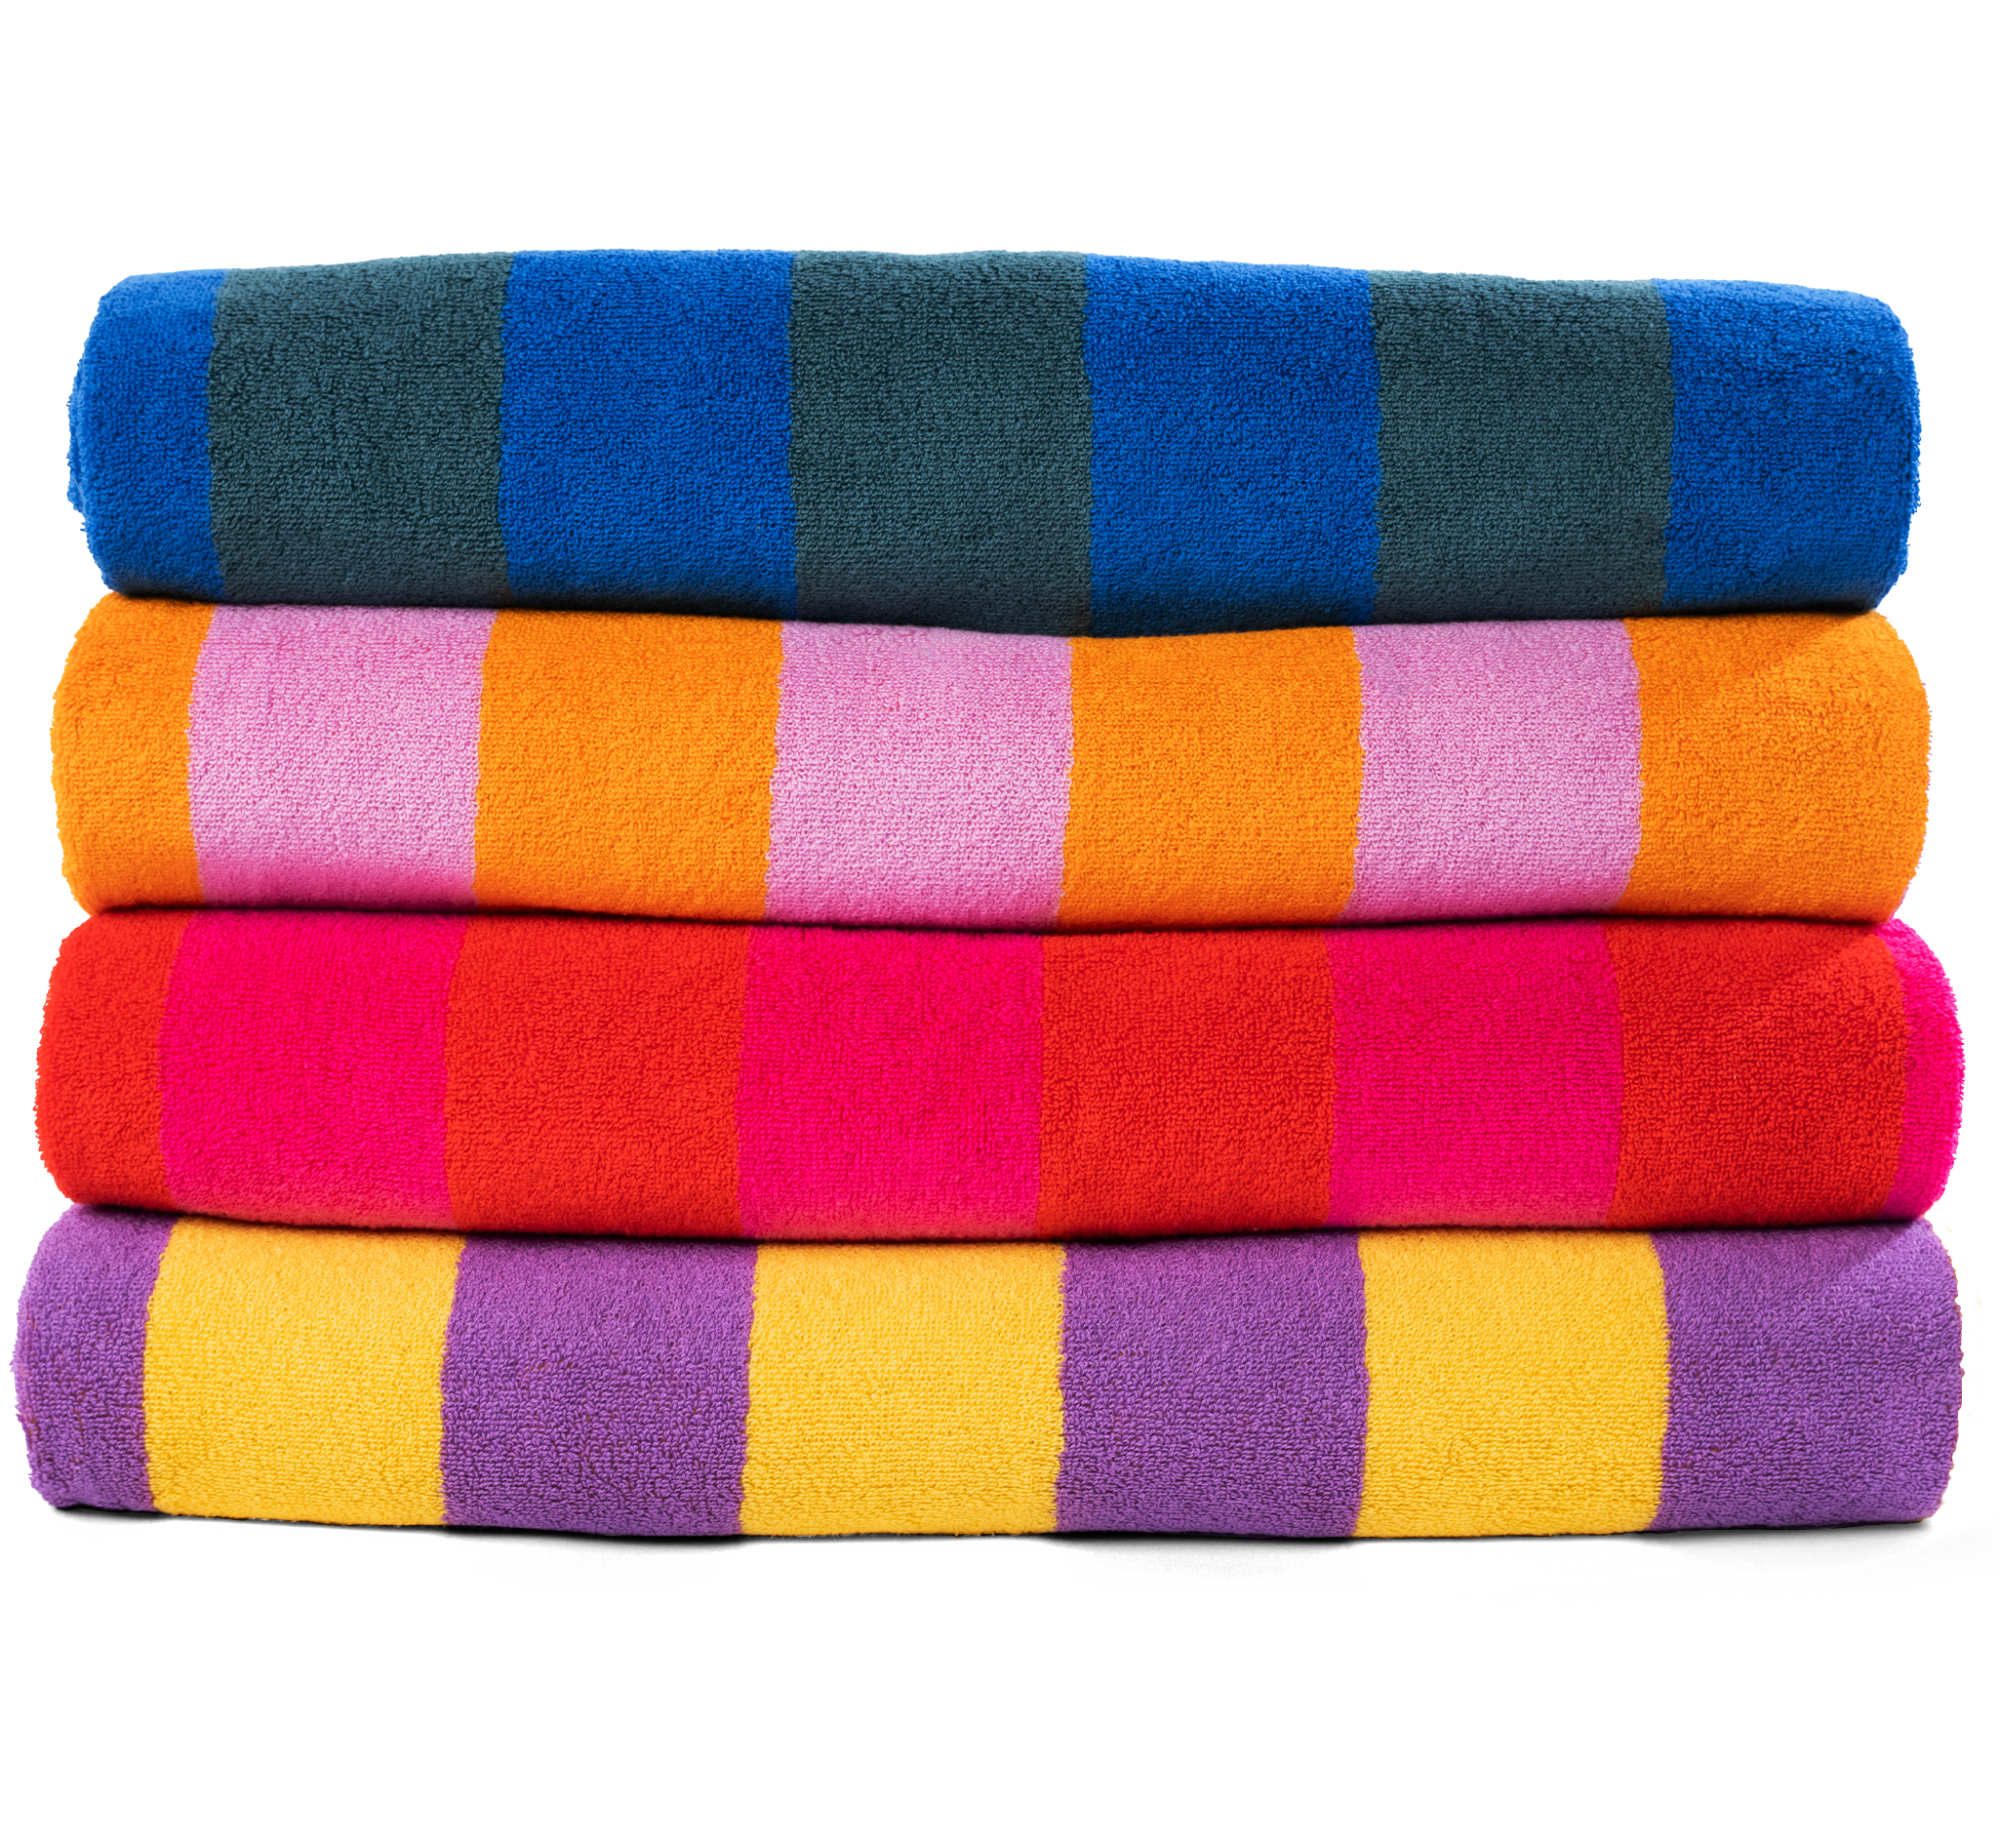 A stack of folded towels.